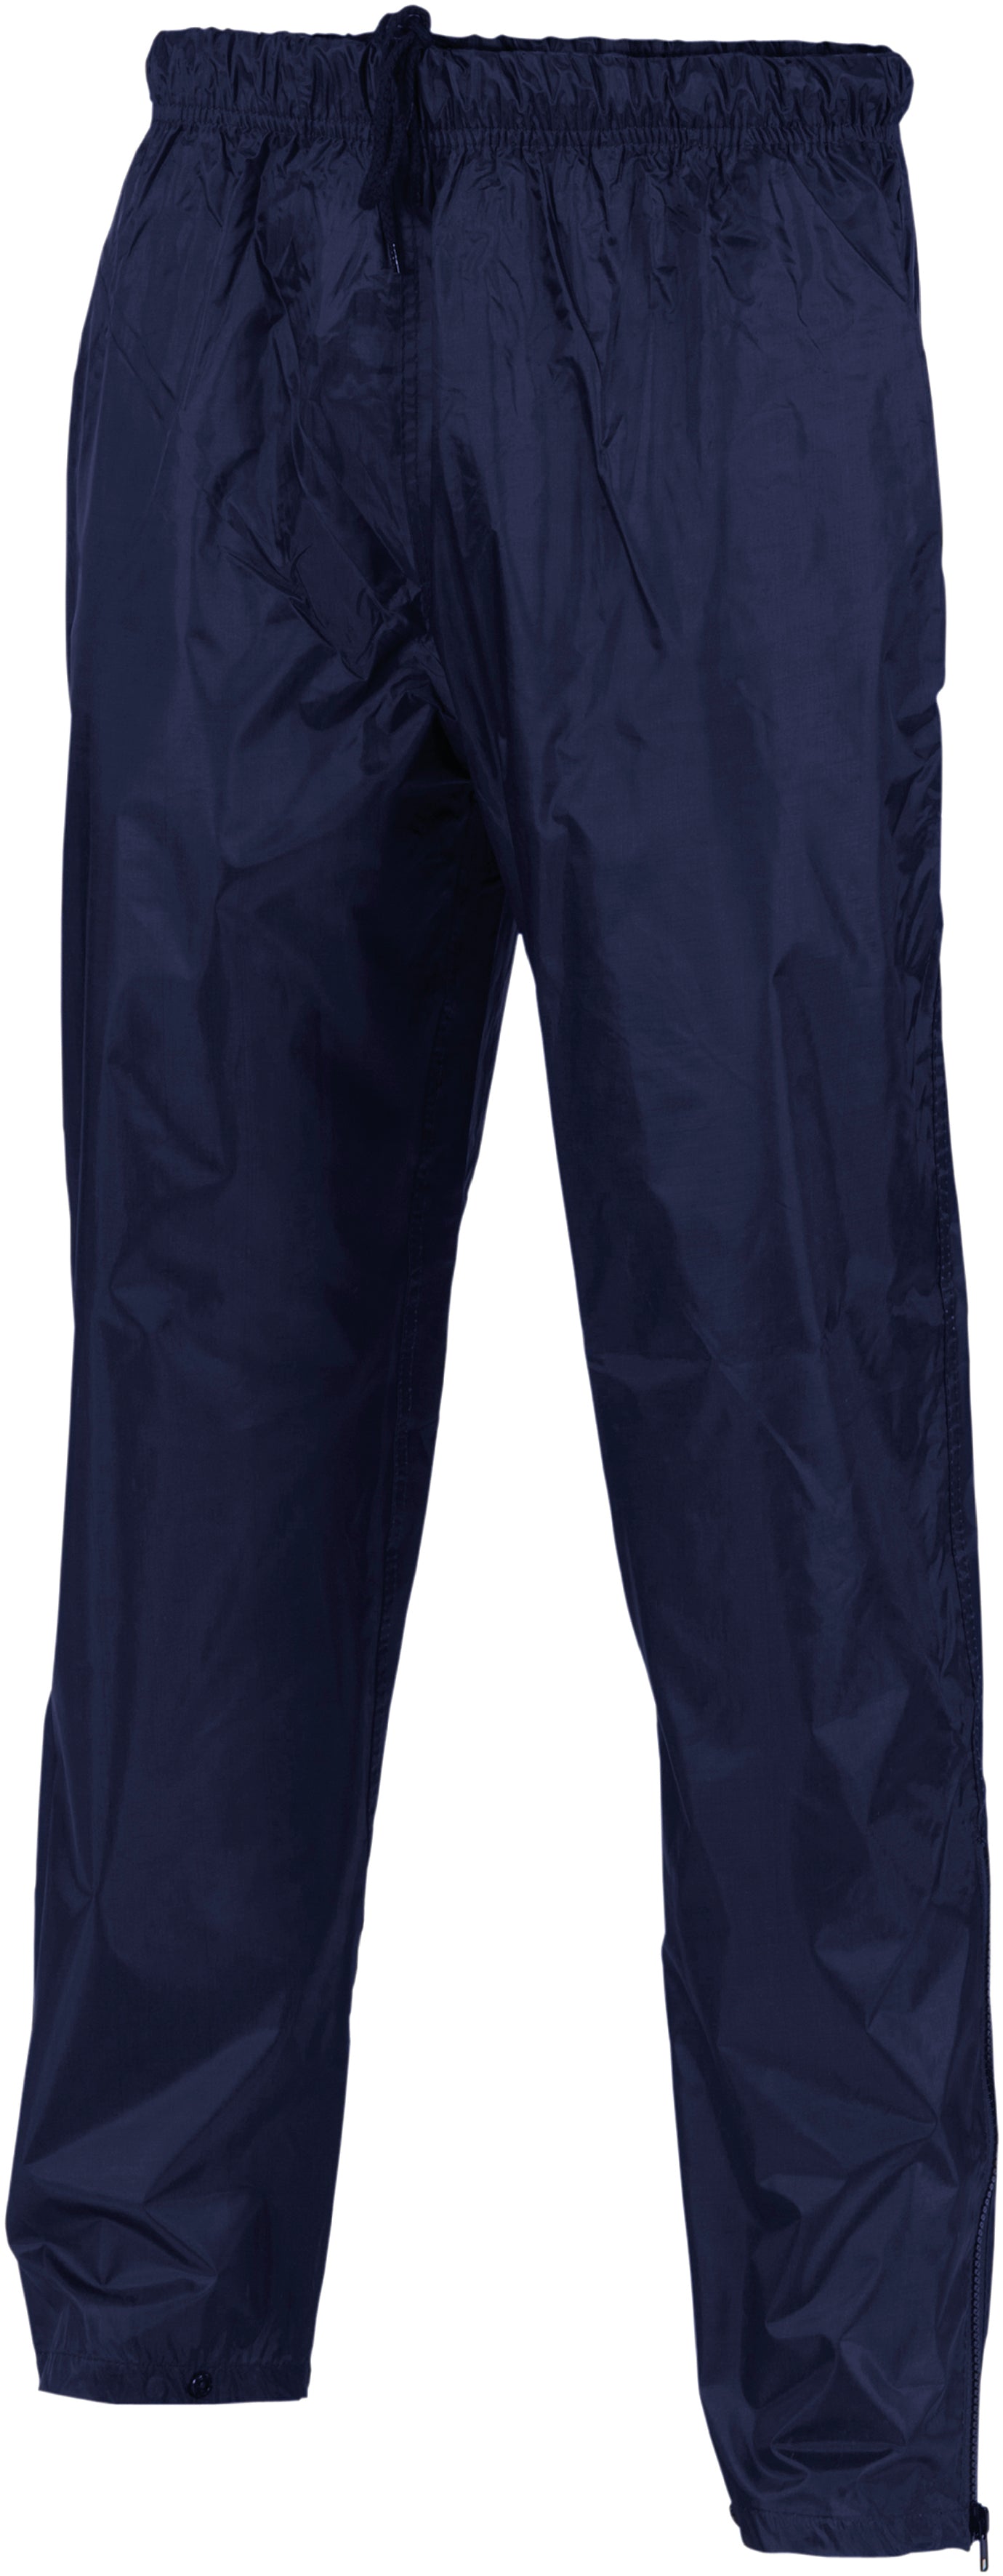 DNC - 3707 Polyester-Coated Water Proof Rain Pants